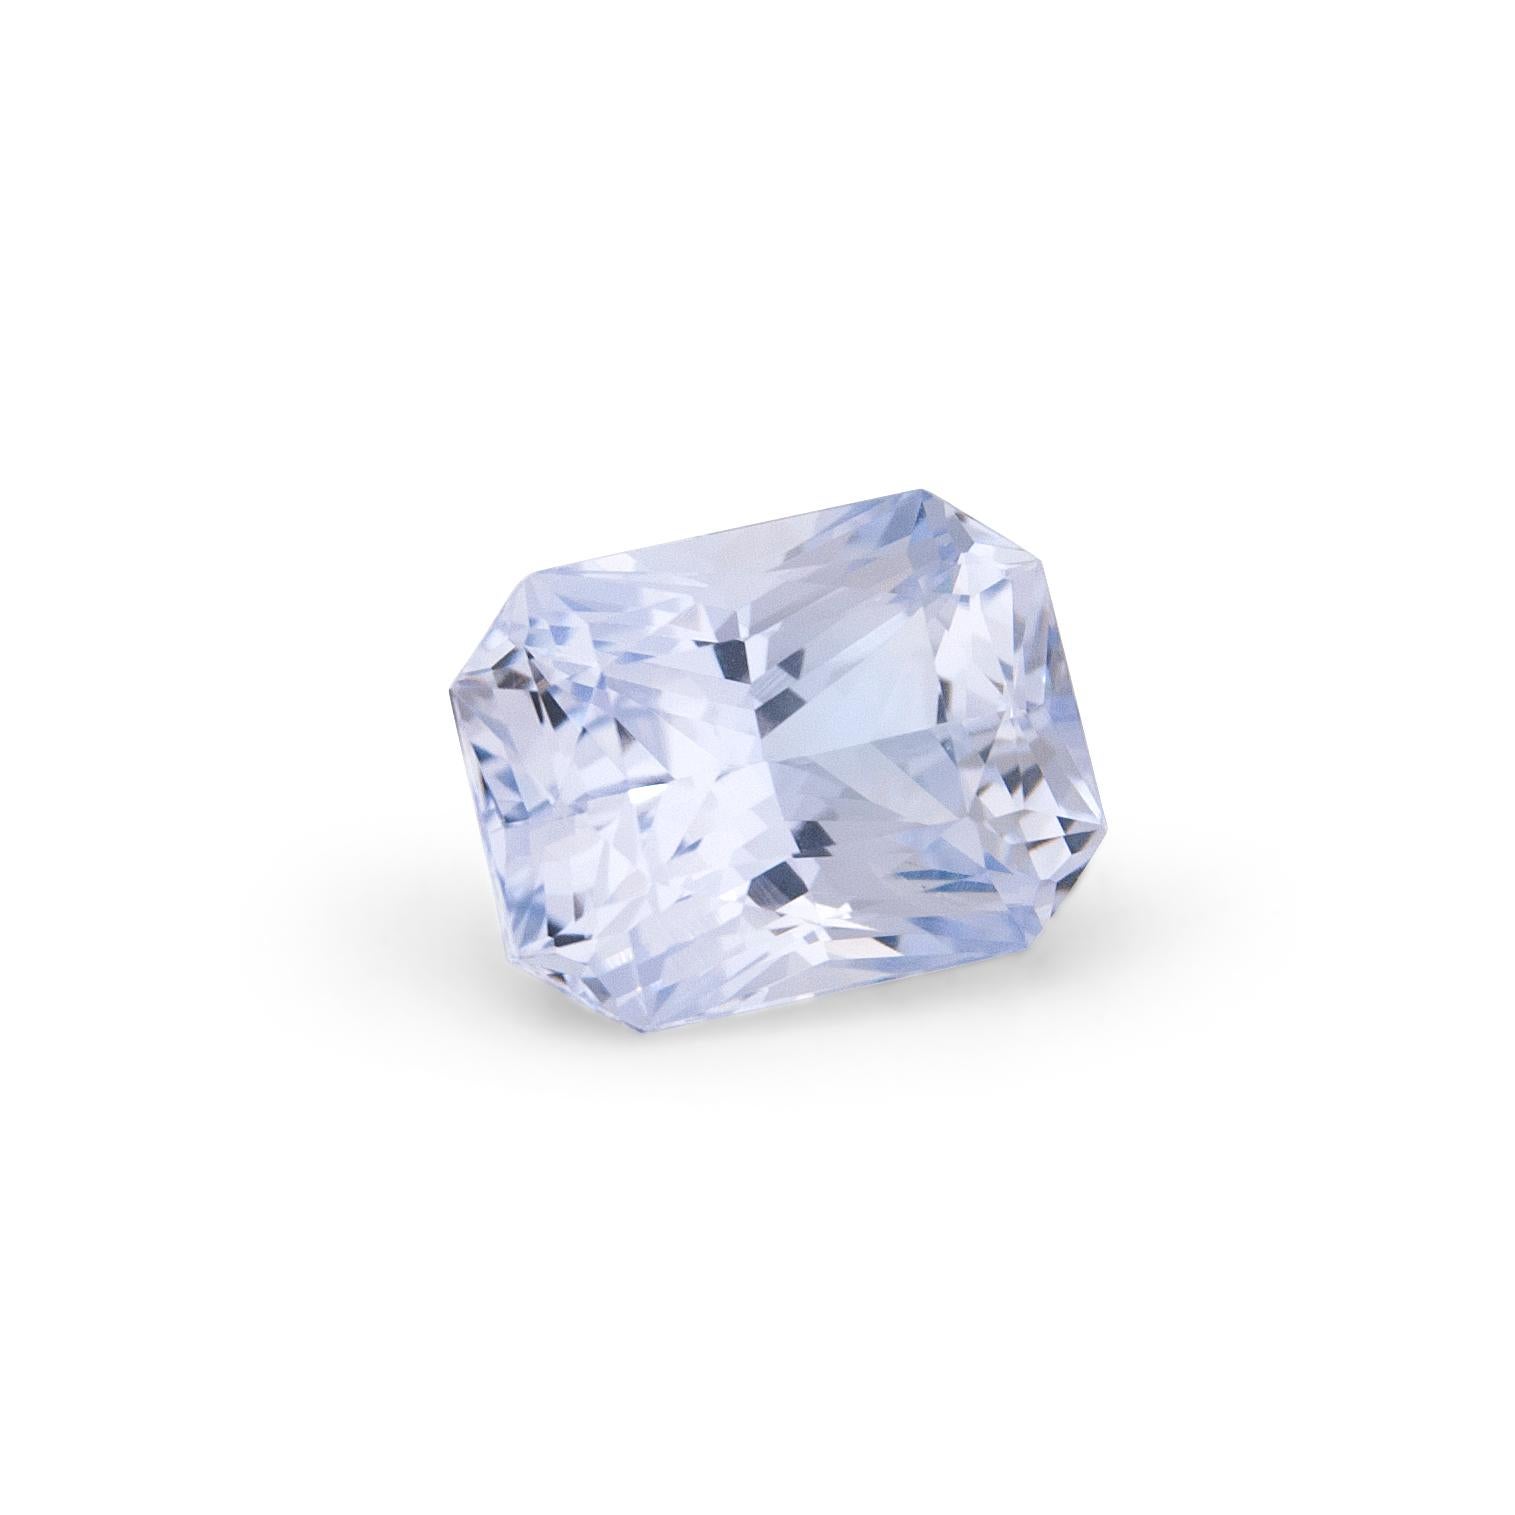 7.86ct natural colour Arctic Ice blue sapphire in octagonal/emerald cut with 2 tapered baguette diamonds on the side equal 0.57ct total. Side diamonds F/G colour VS clarity. Set in an 18k white gold ring. Size 6. Resizing up or down 2 sizes included